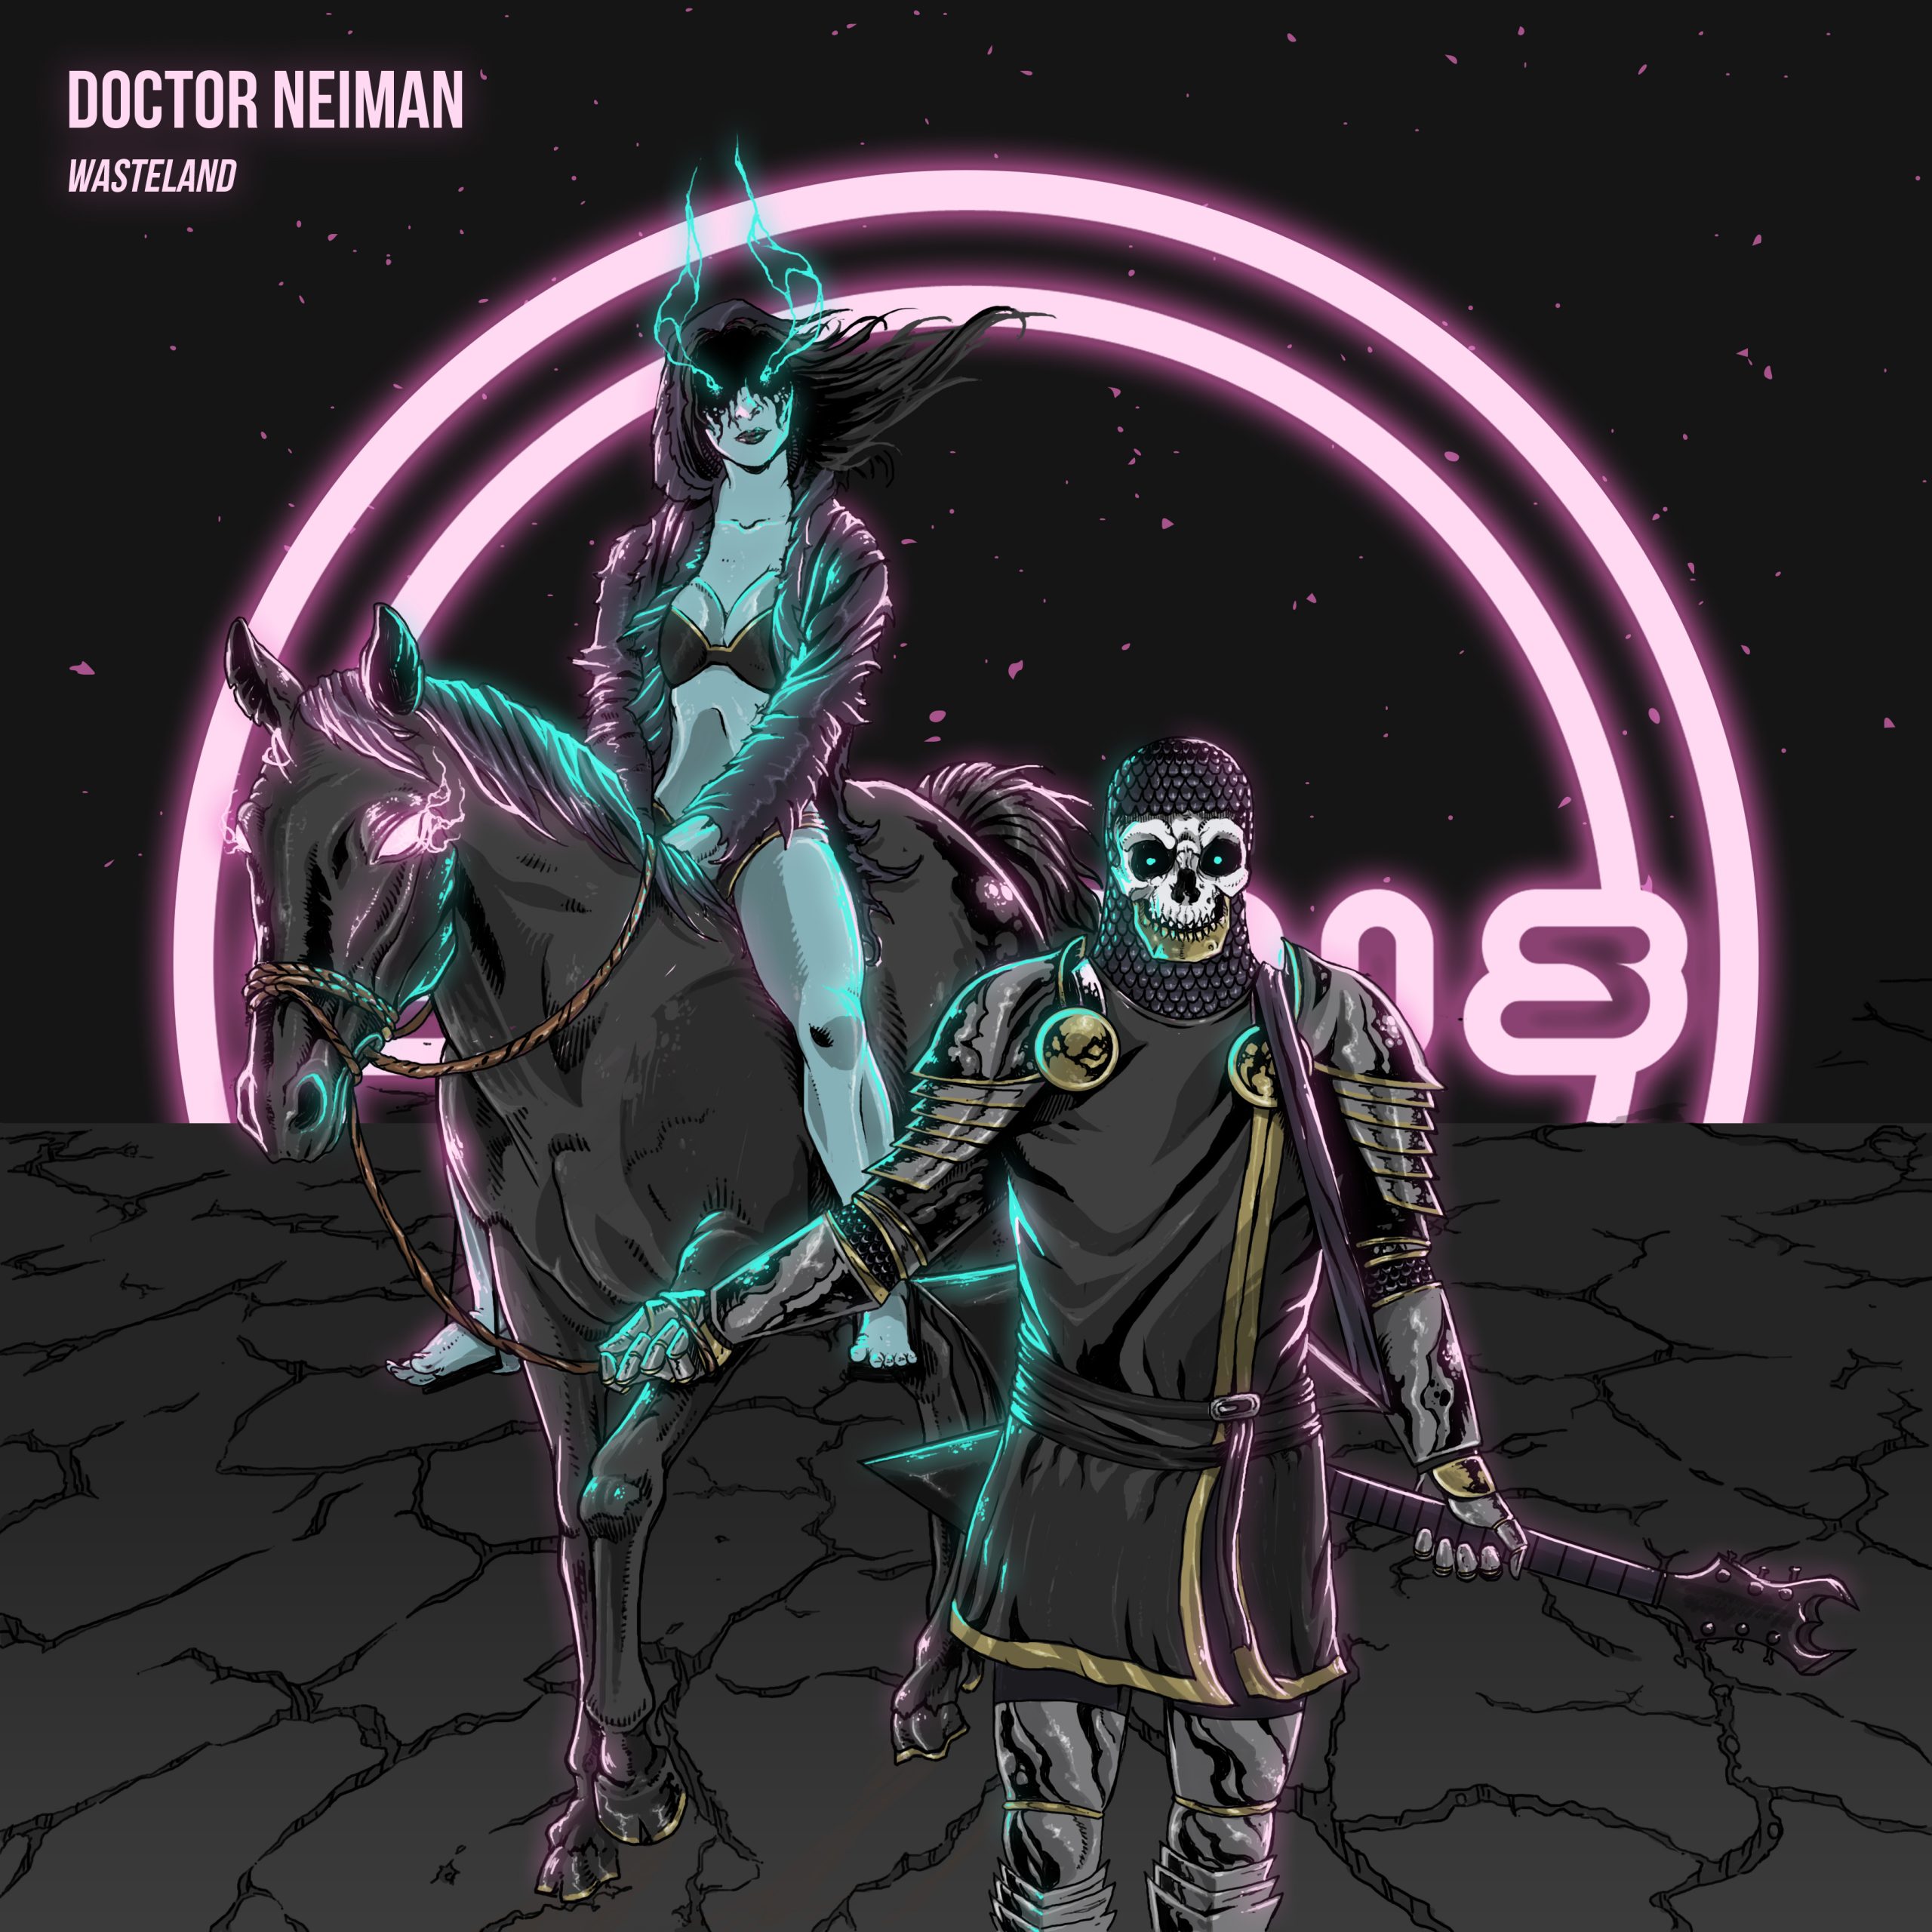 Doctor Neiman Delivers Pop Bass Utopia on New Single “Wasteland”